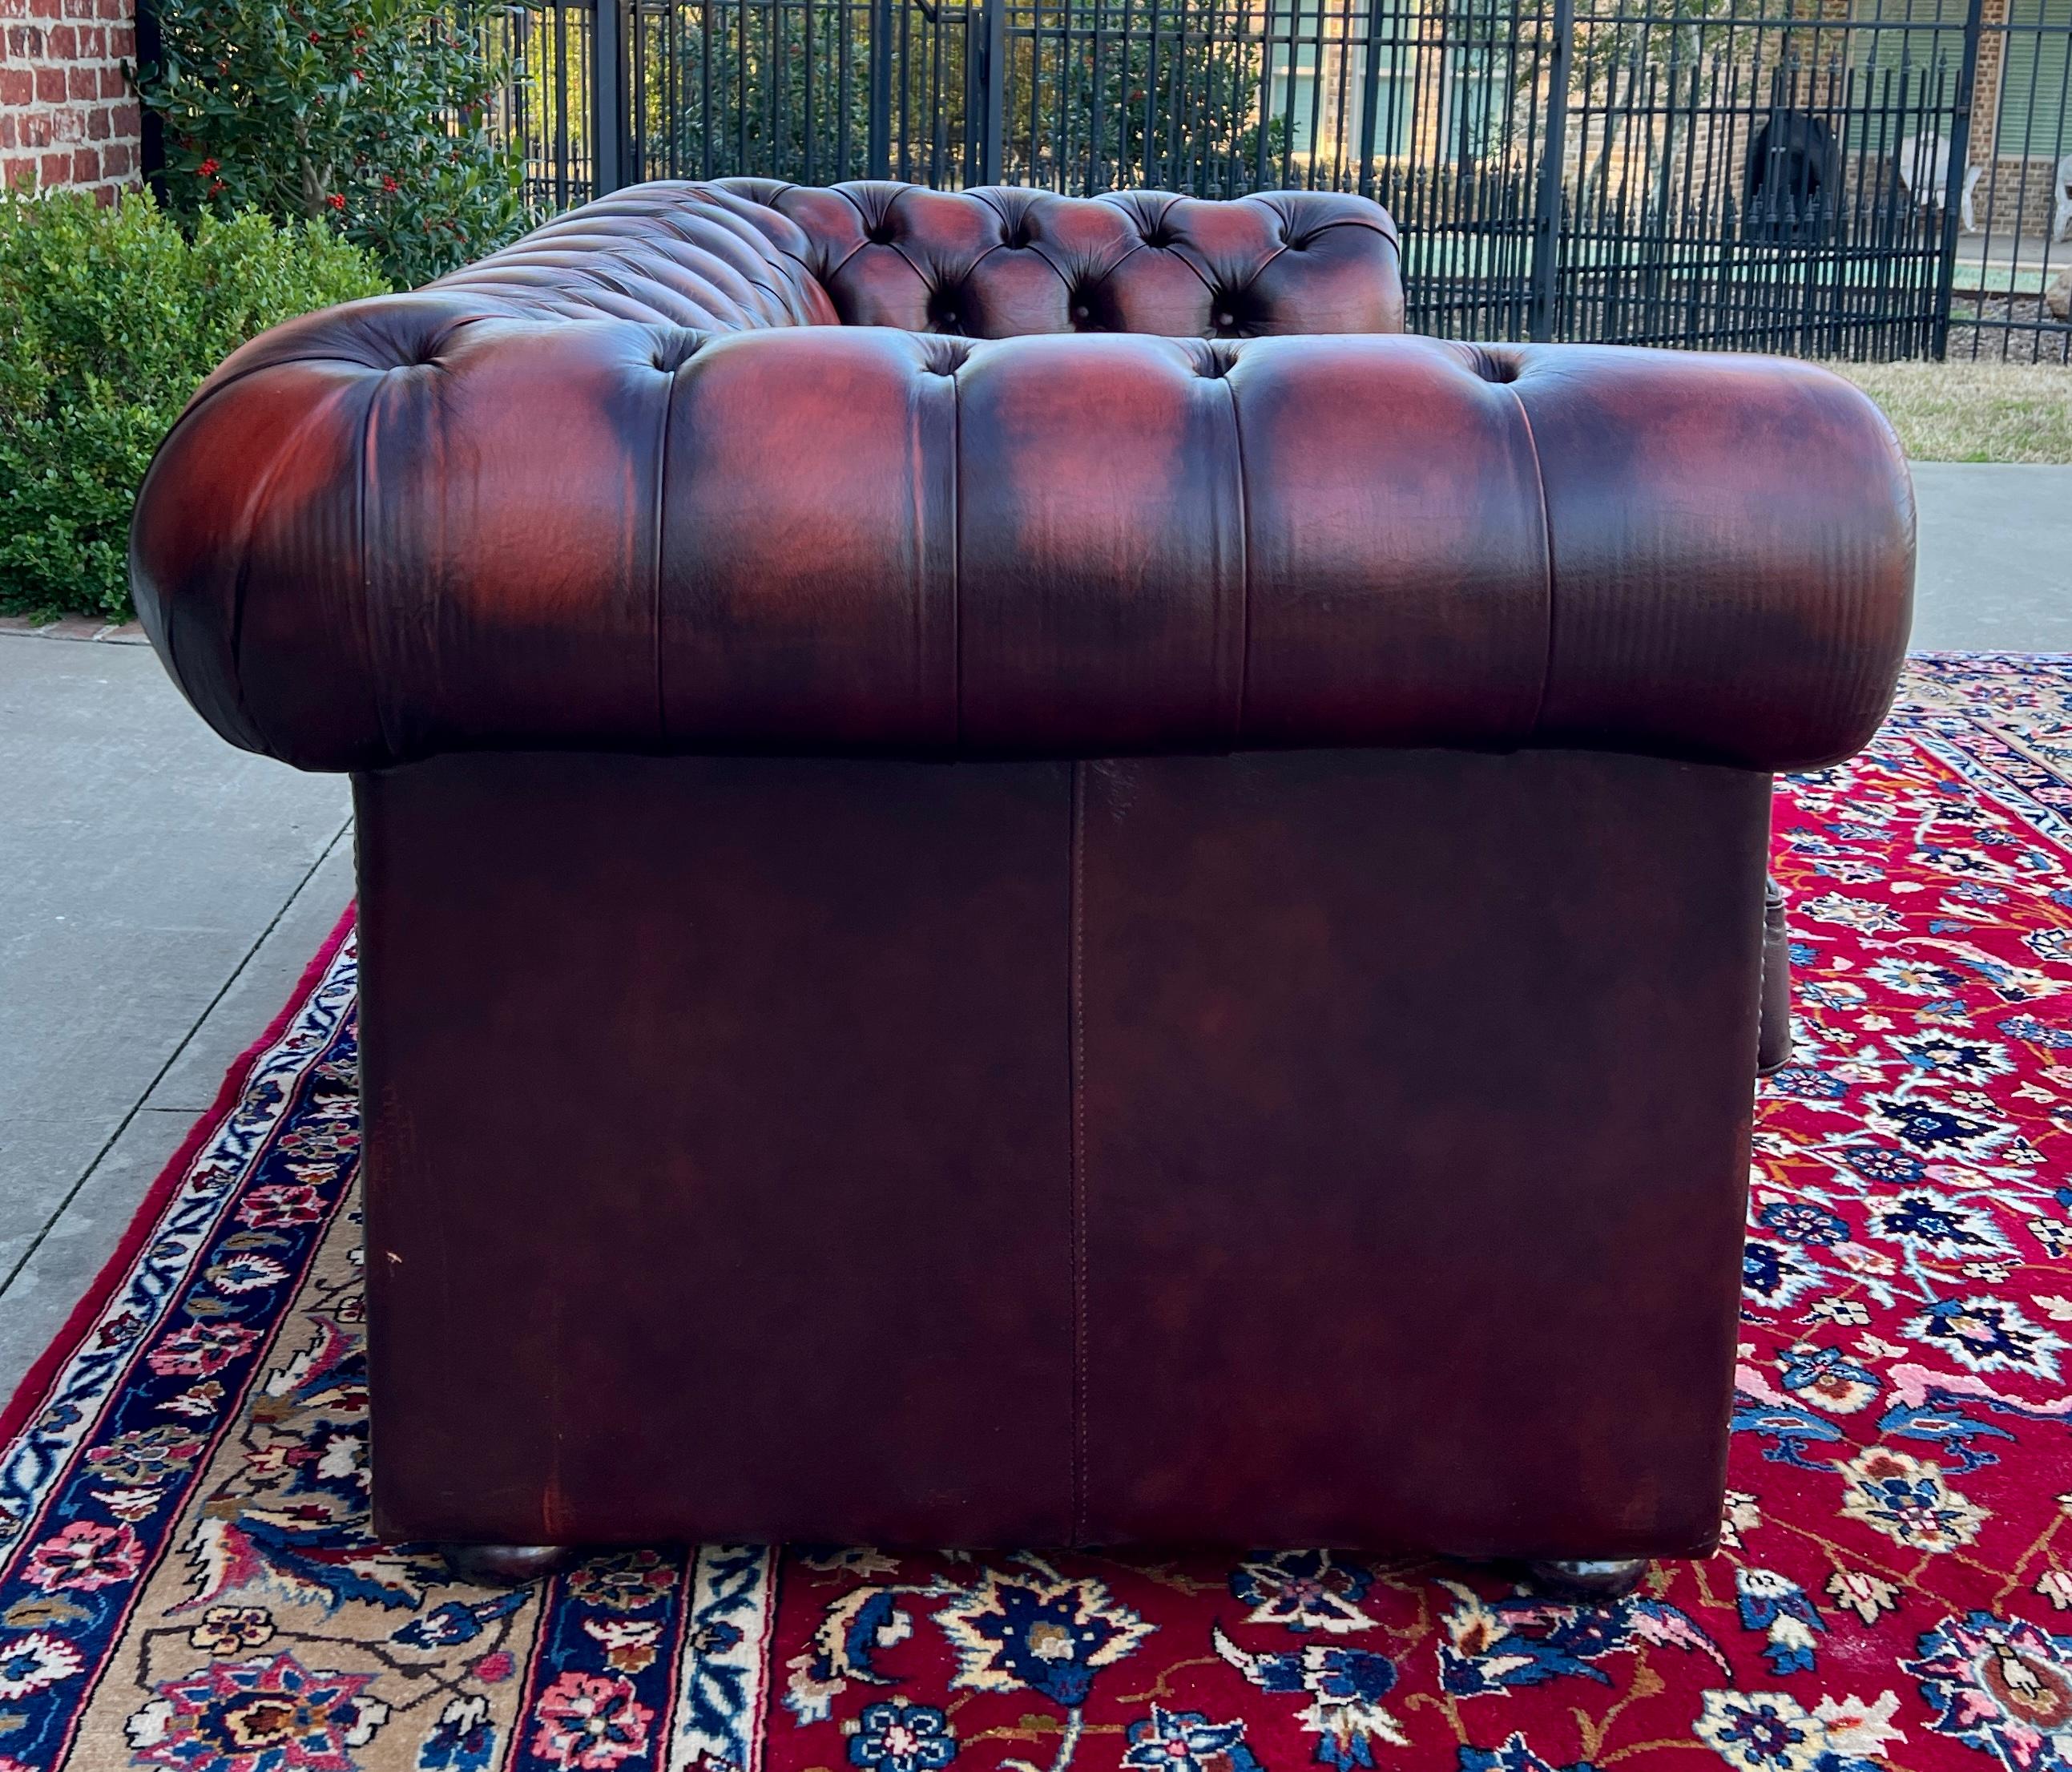 Vintage English Chesterfield Leather Tufted Love Seat Sofa Oxblood Red #2 6